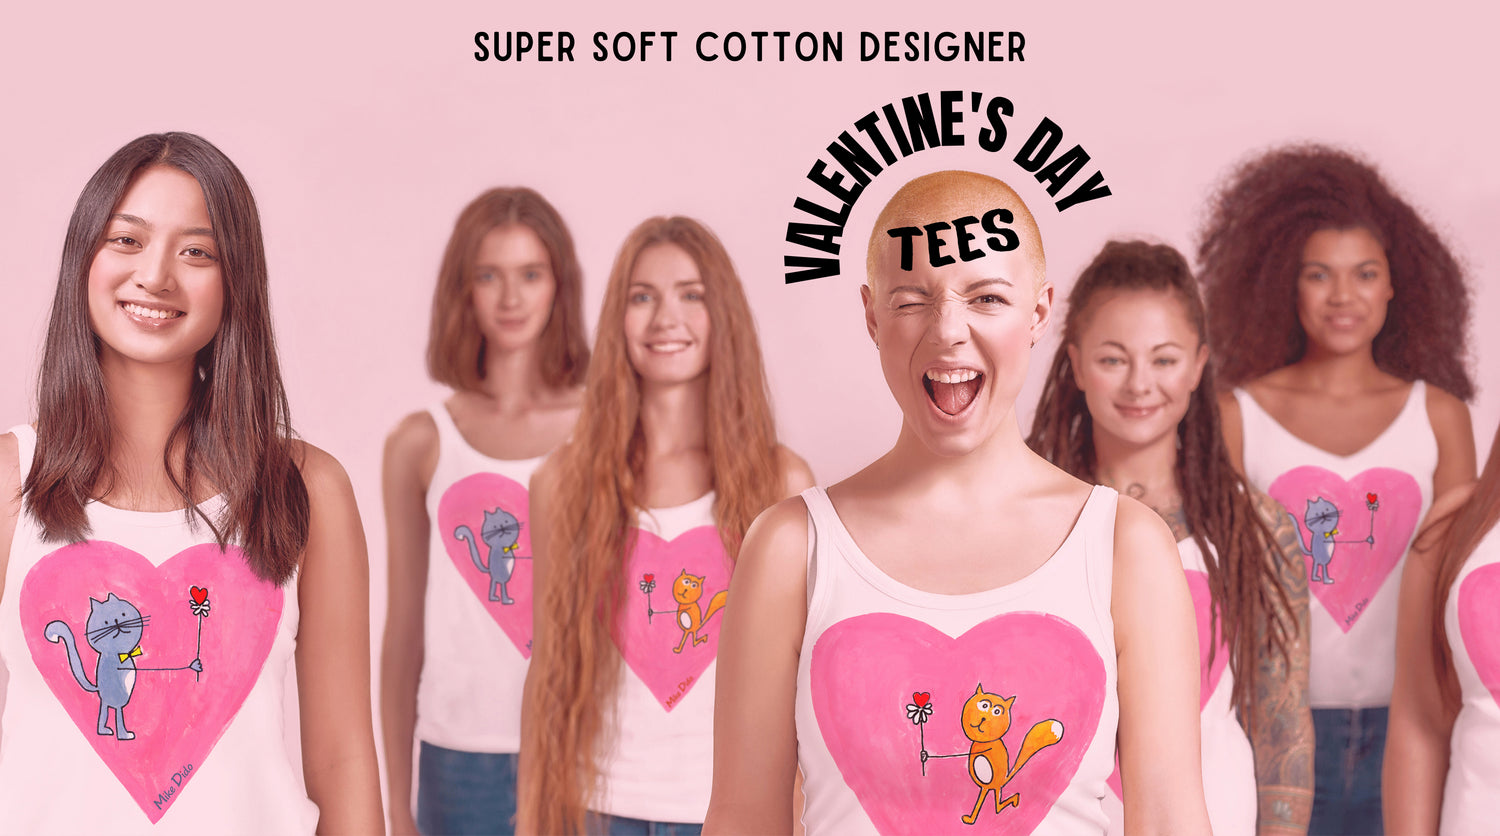 Tops - Women Luxury Collection as Valentine's Gift